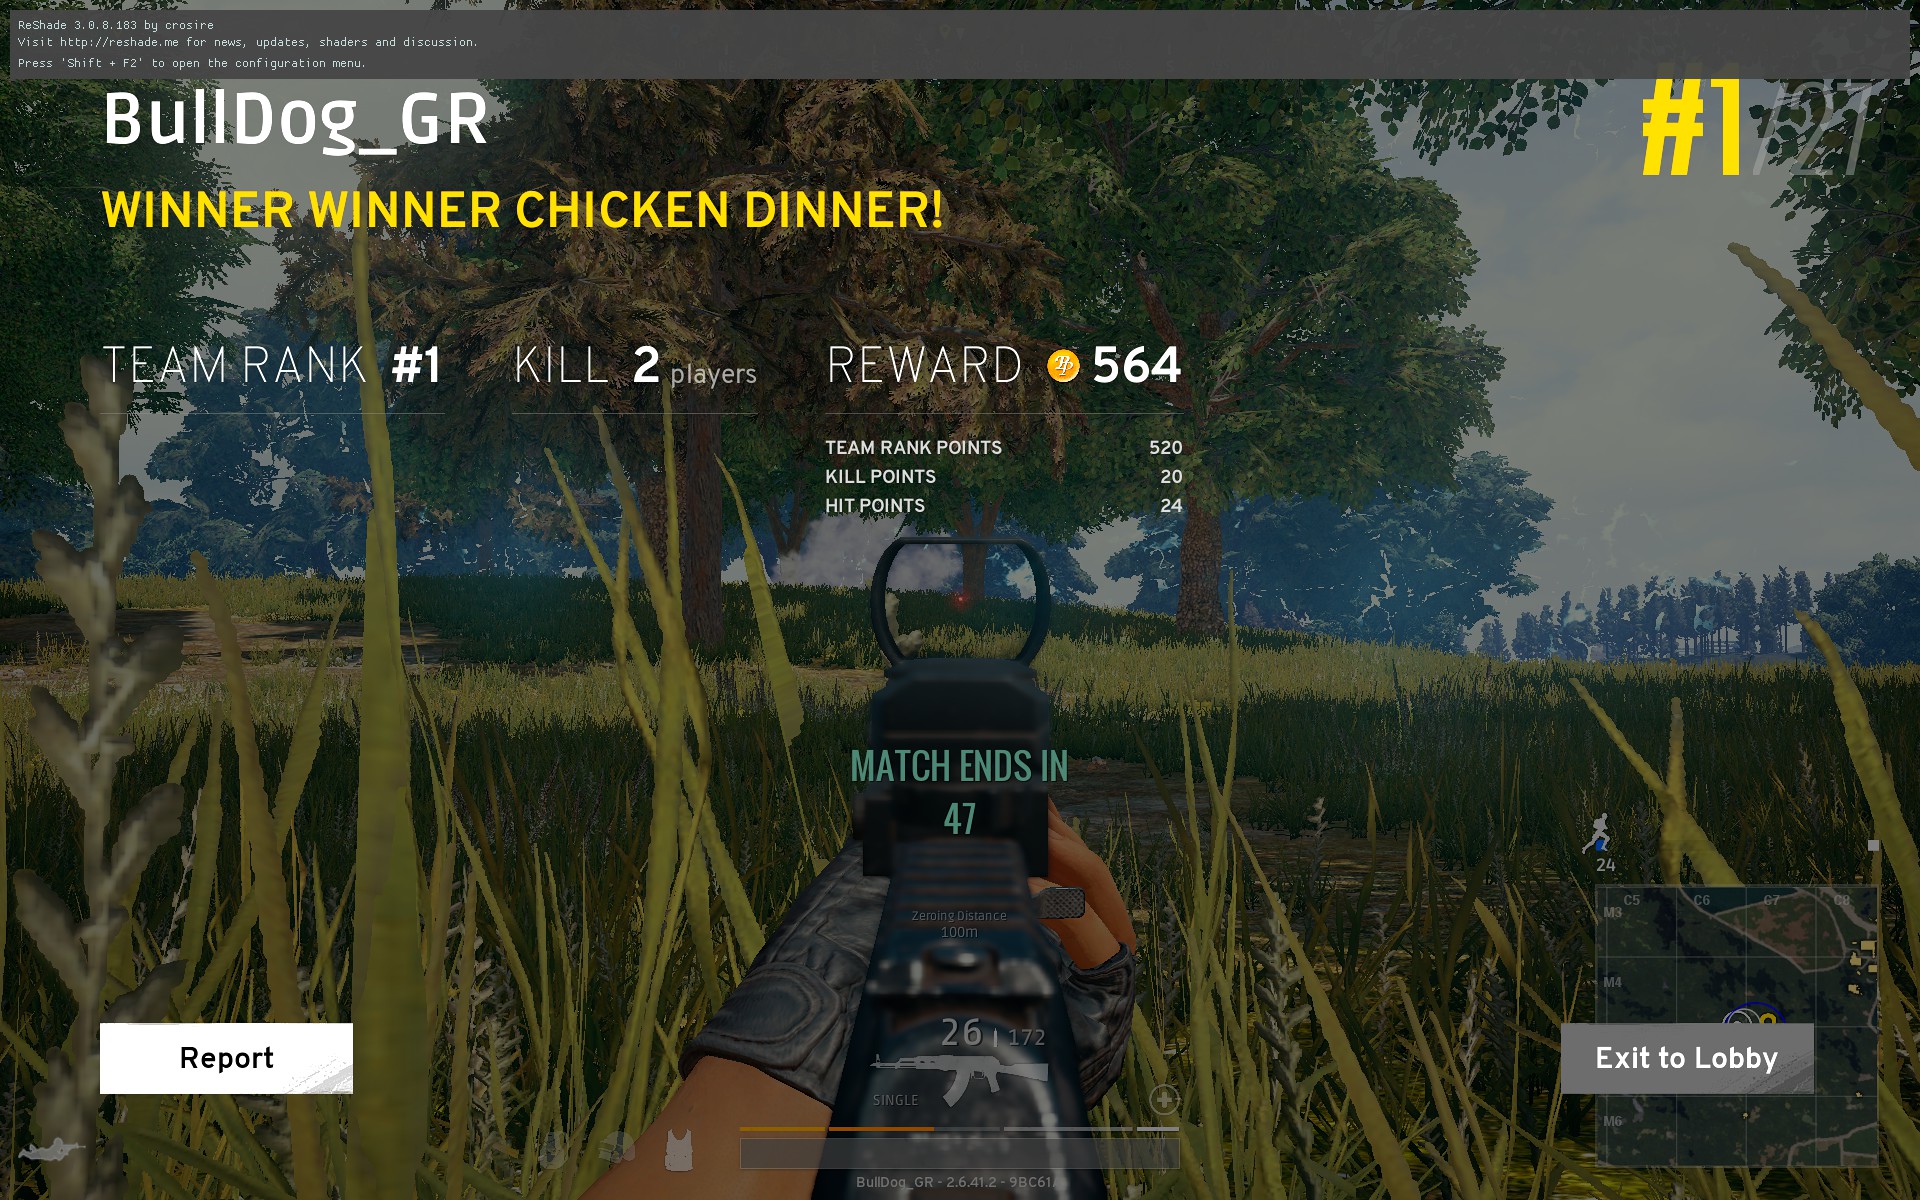 Lets see your Winner Winner Chicken Dinner screenshots! - Page 2 090DCC0FA776F9C2412643D57E8E011A9B989A3C